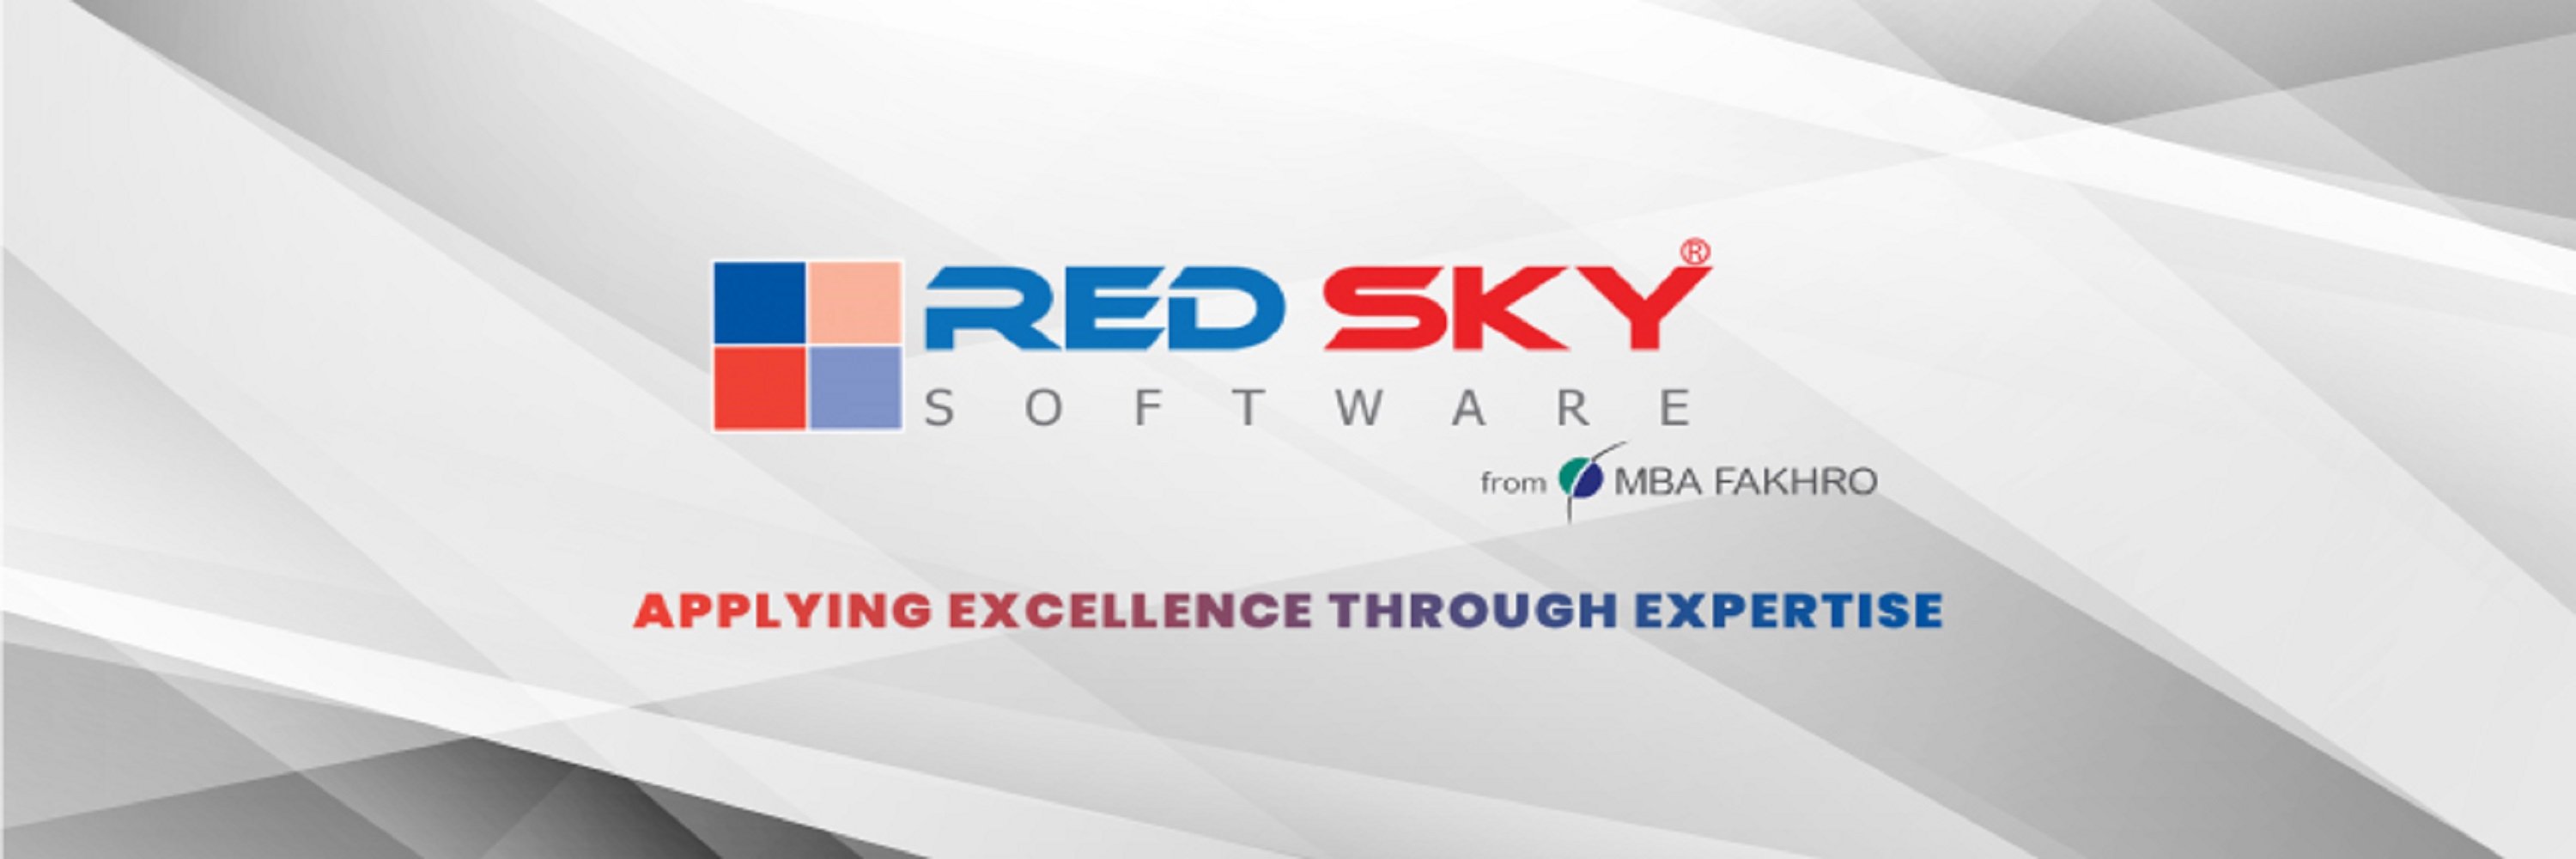 Redsky Software WLL - Software Development Company In Bahrain cover